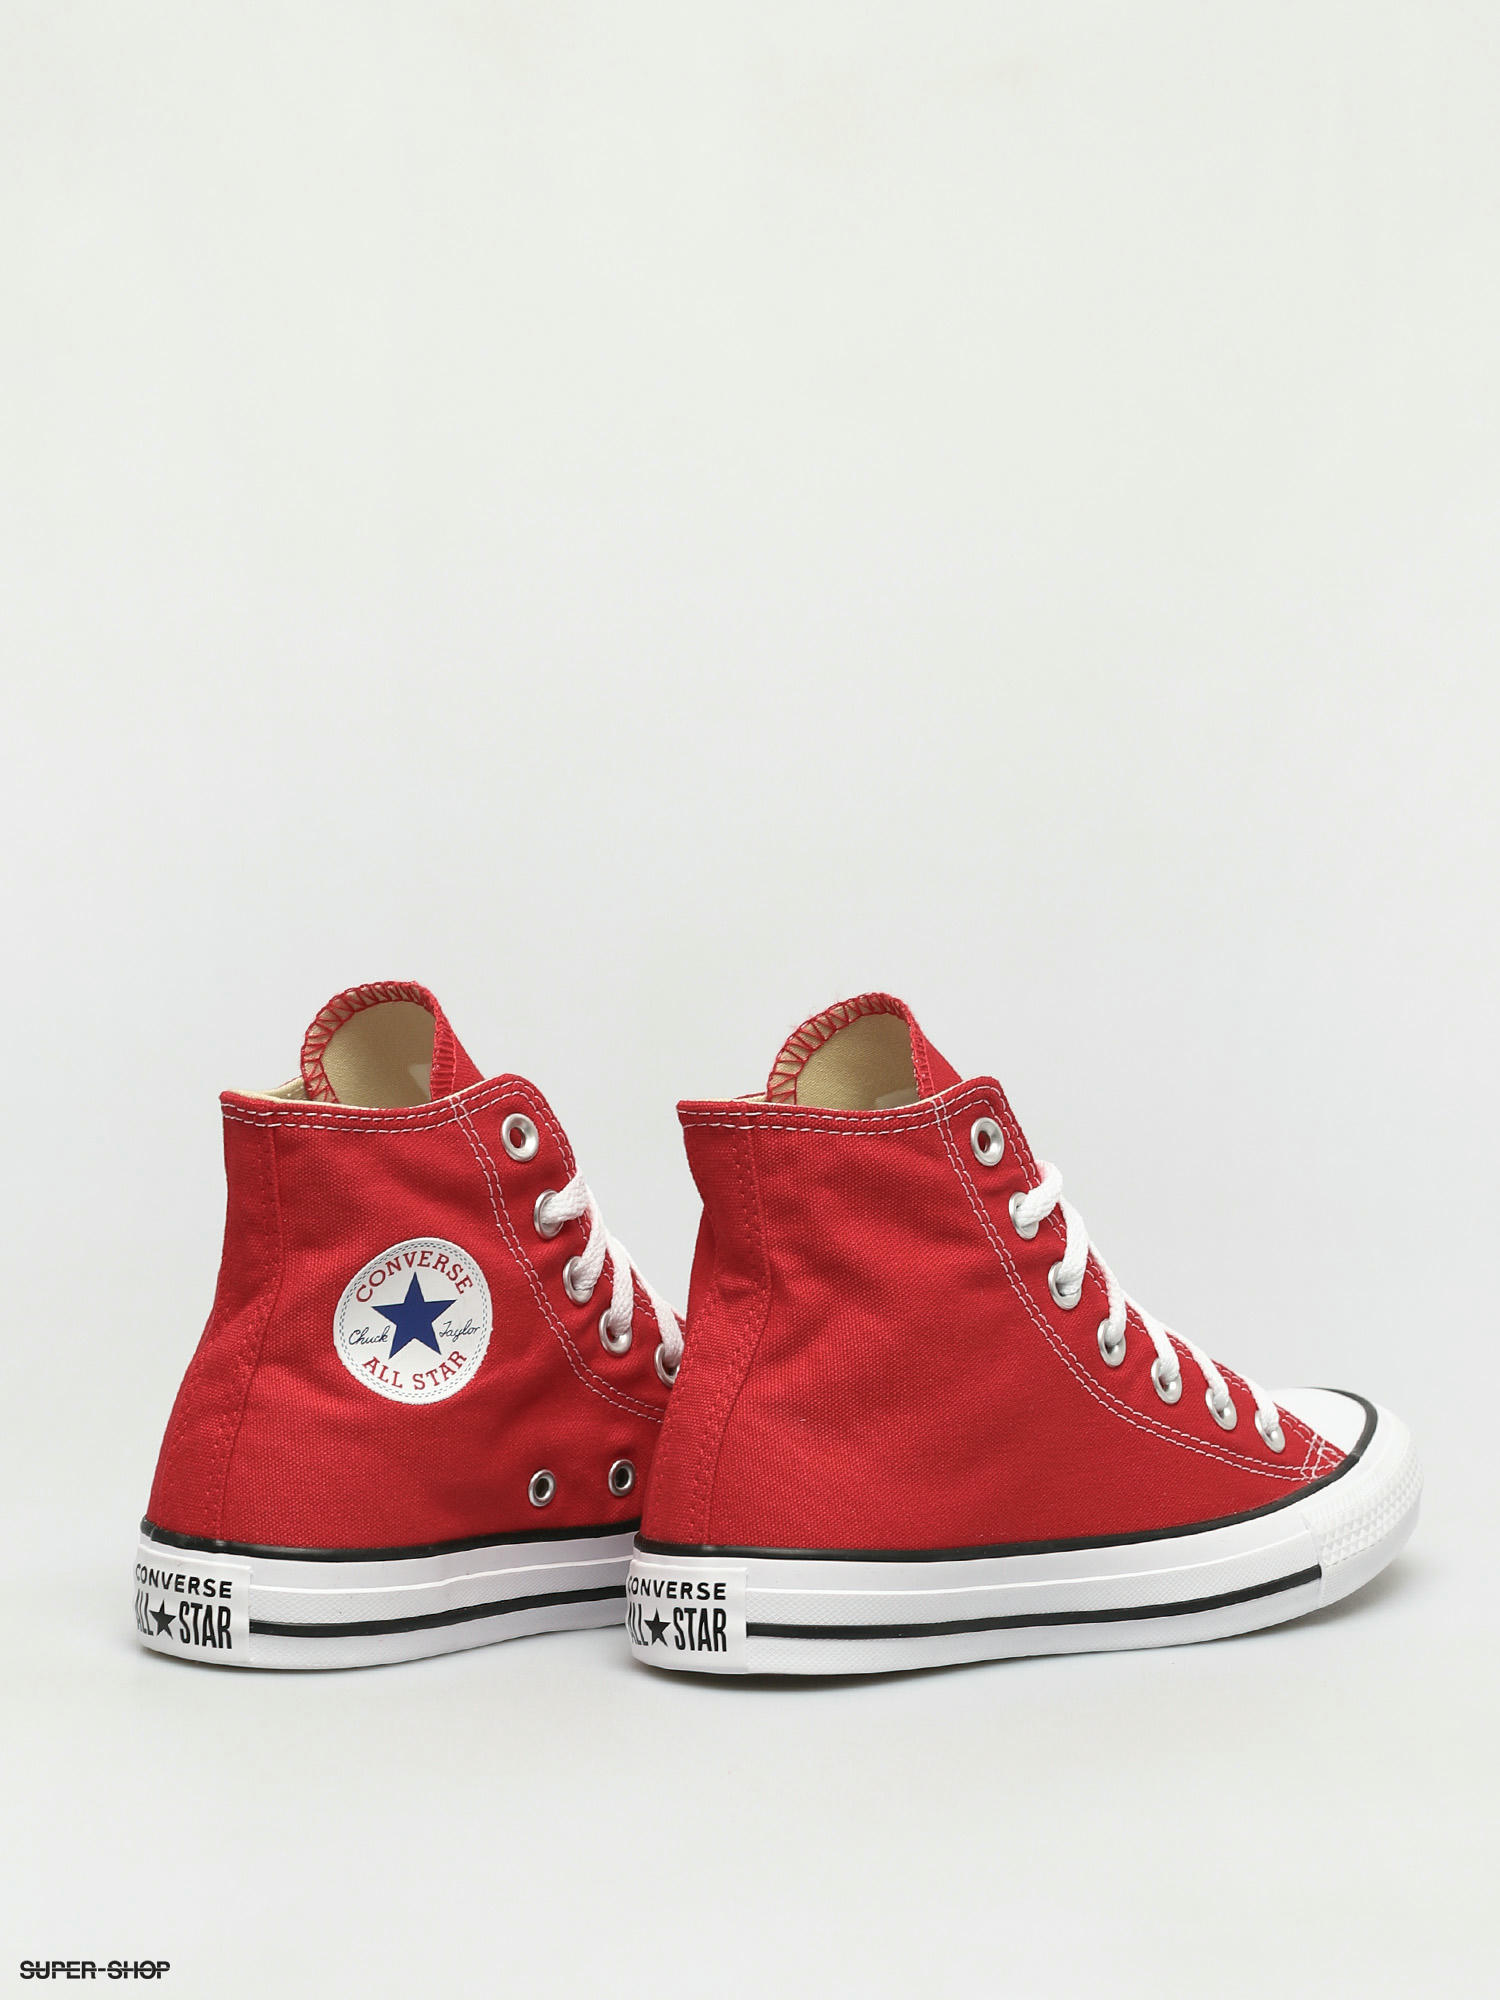 red converse slip on sneakers